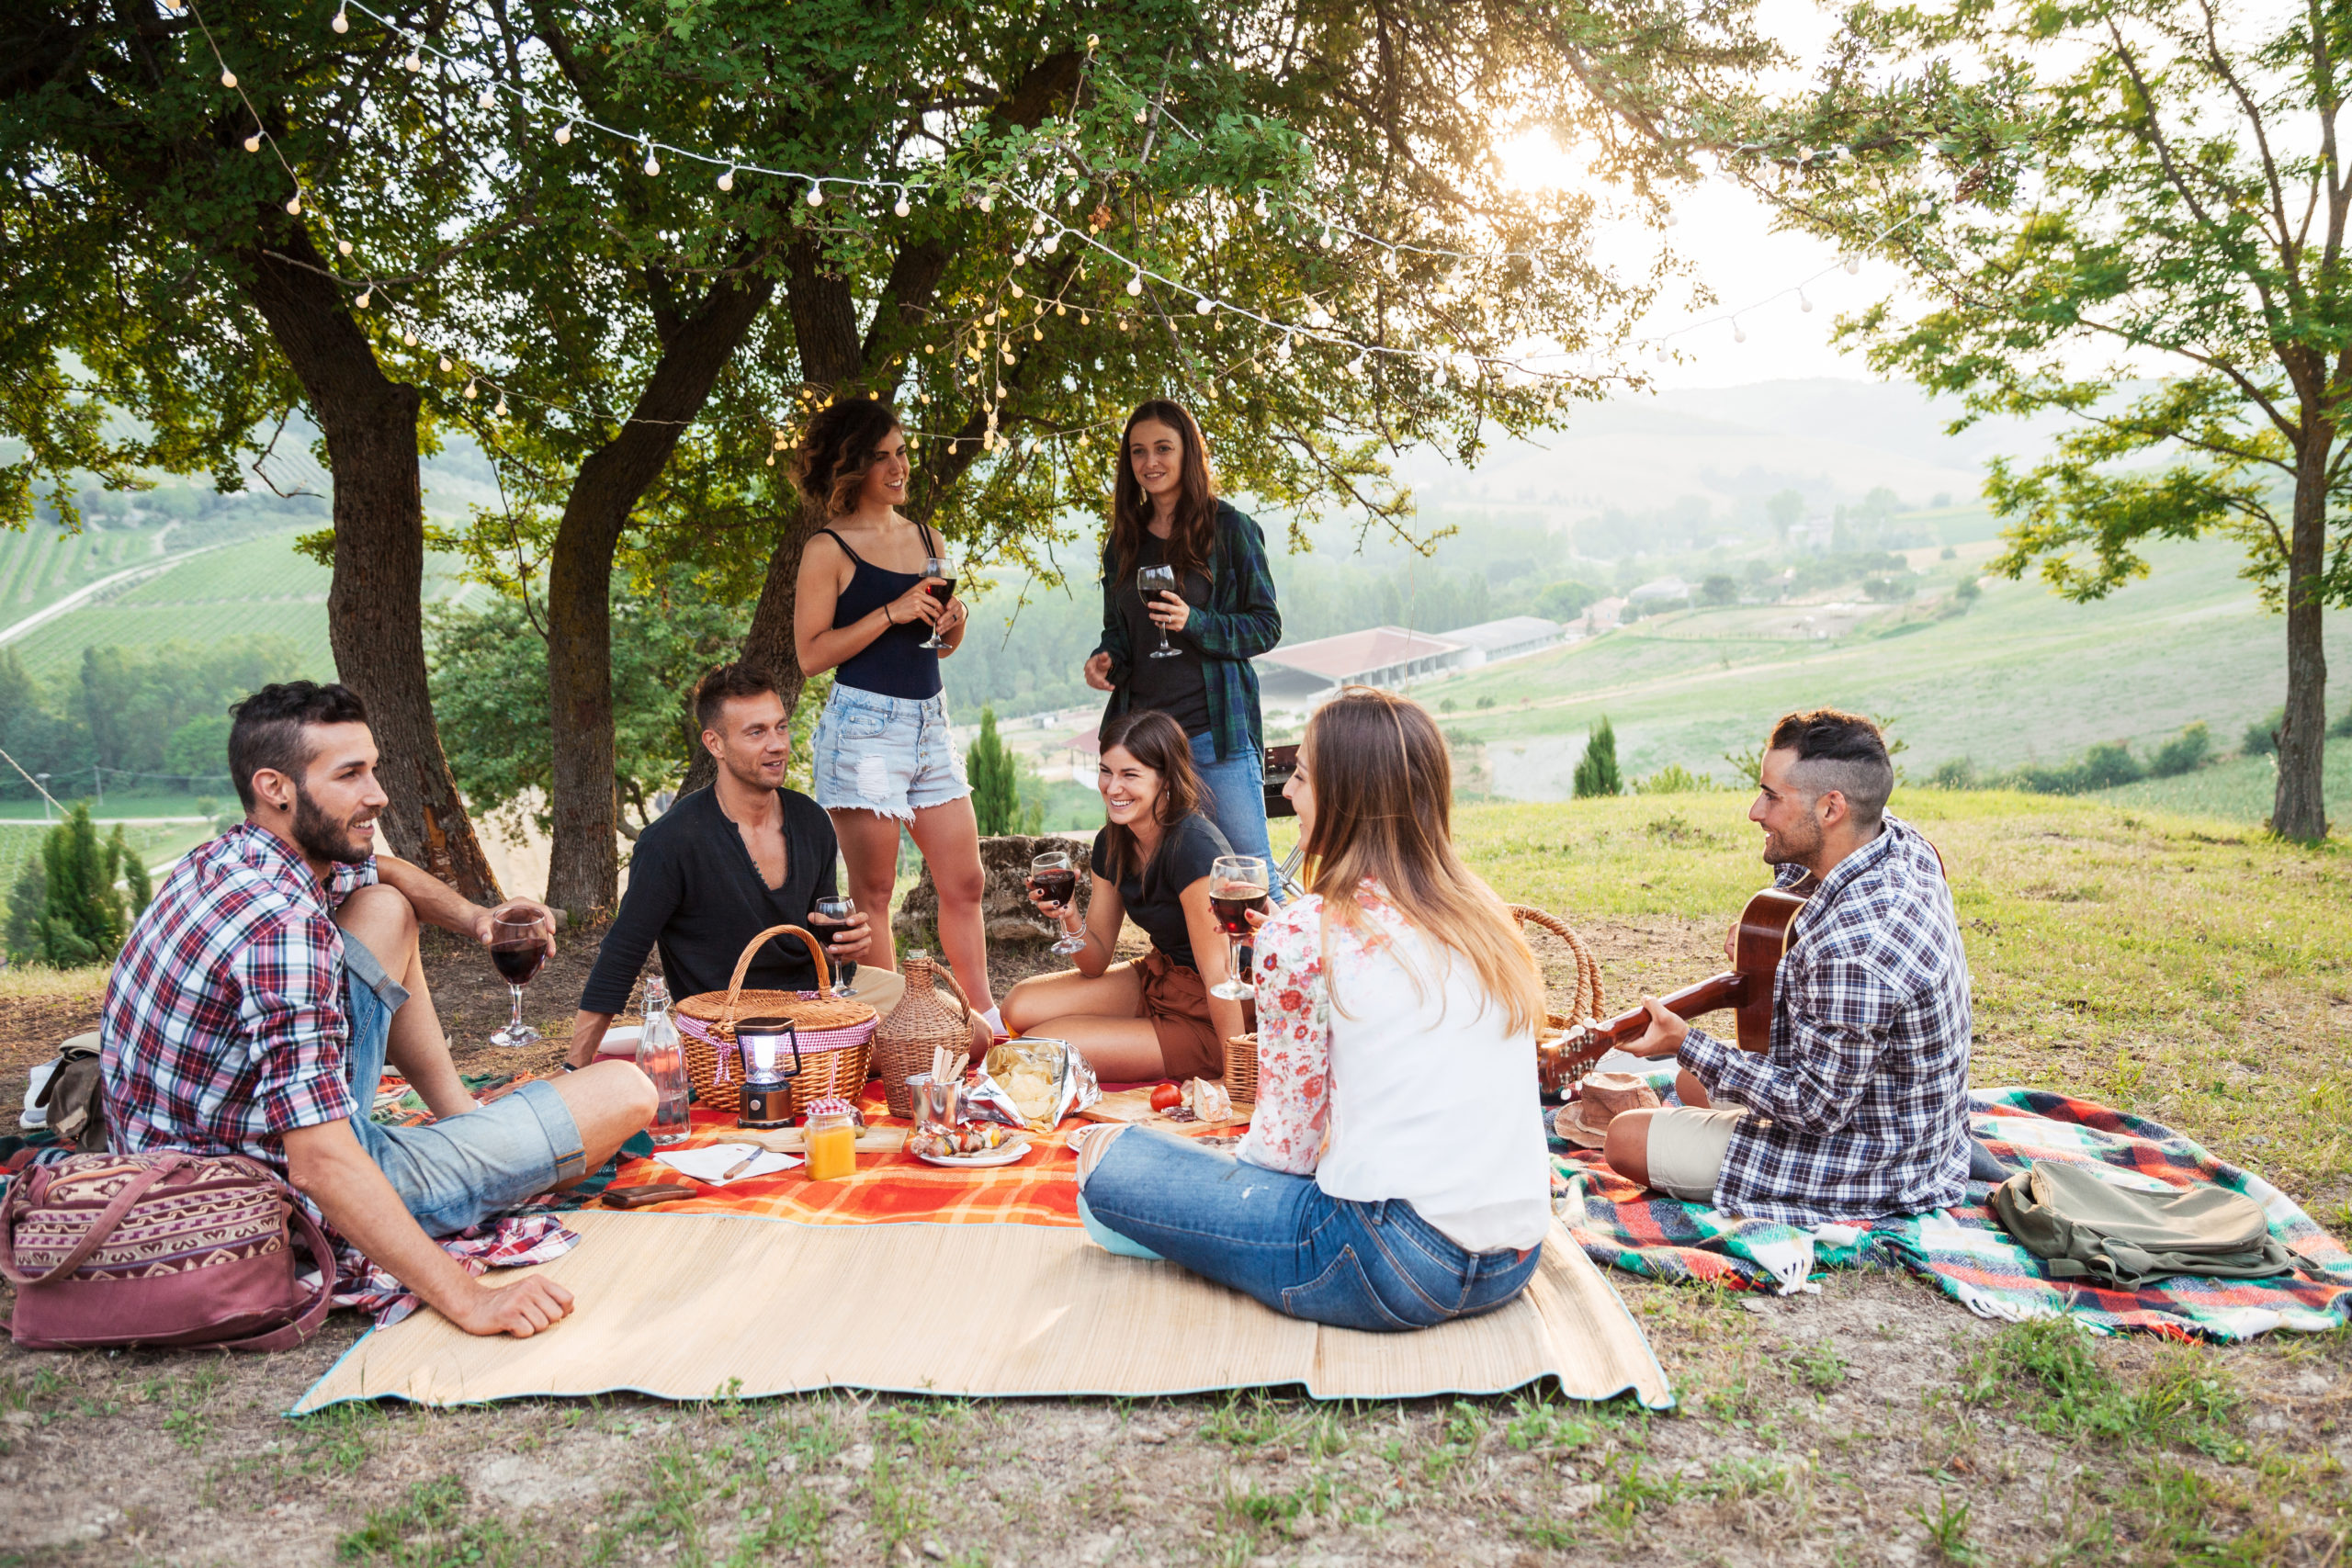 Picnic in the countryside. Group of young friends, at sunset on spring day, are sitting on the ground in a park near trees. They drinking red wine and eating grilled meat with barbecue